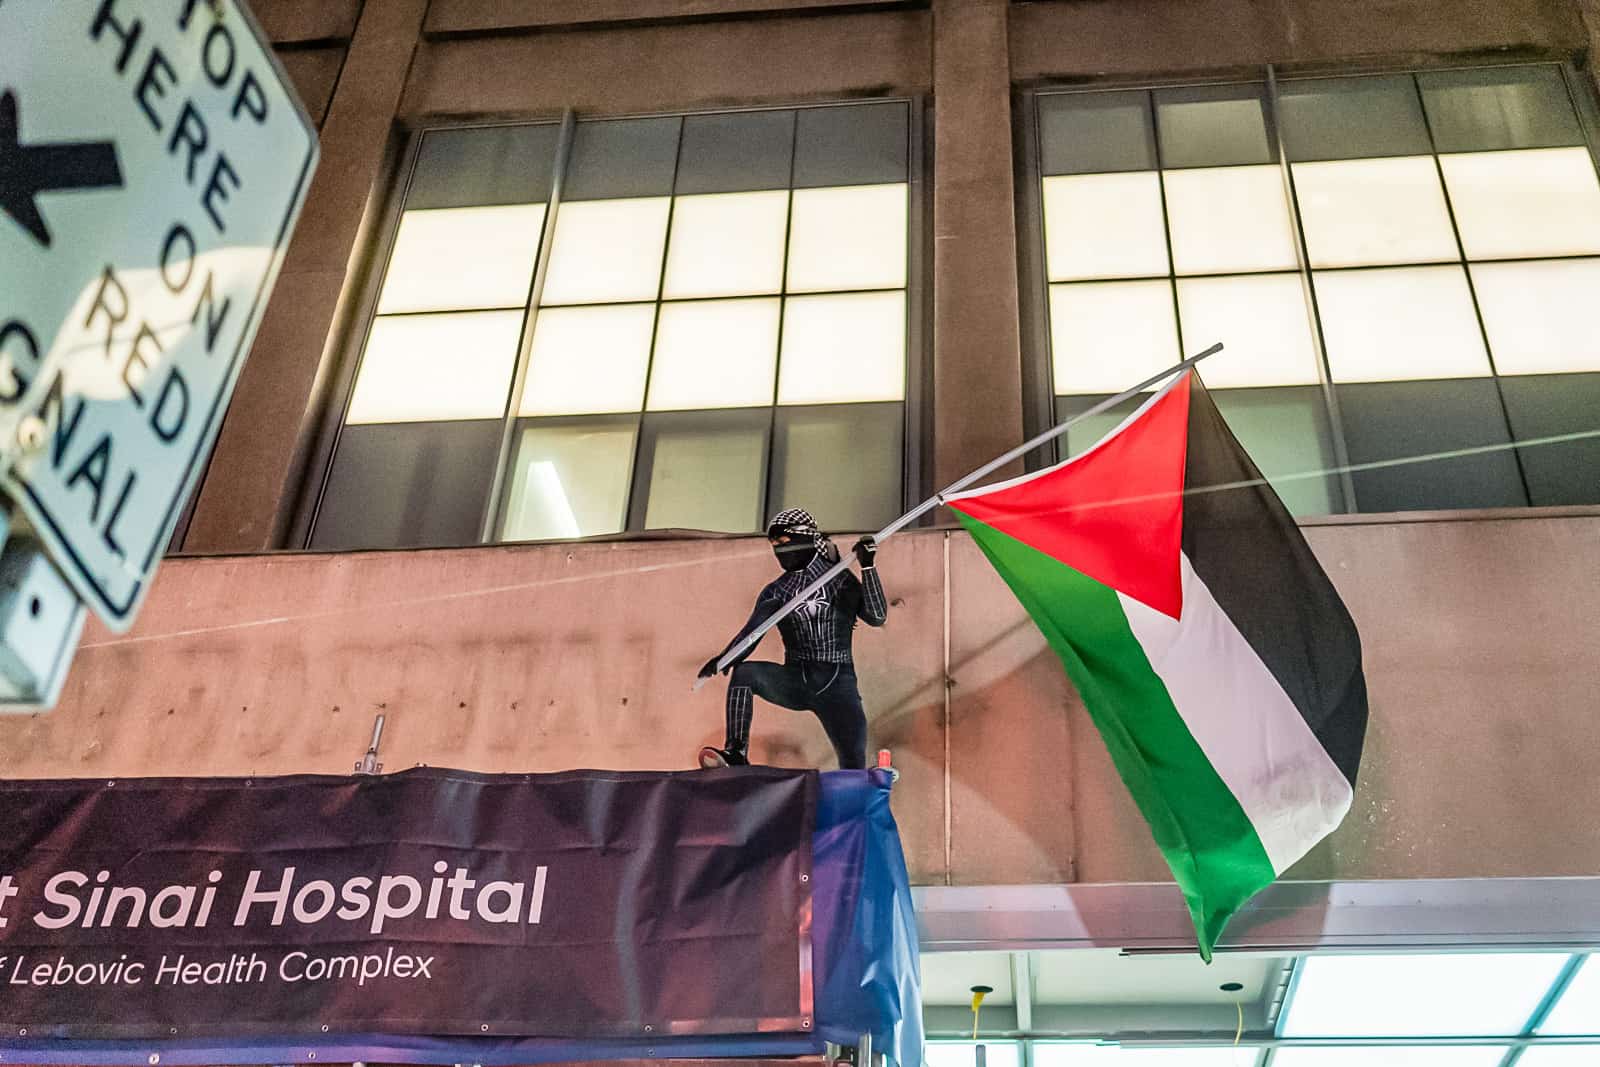 A demonstrator dressed as Spiderman costume waves a Palestinian flag above the entrance of Mount Sinai Hospital as the rally goes by. Photo: Joshua Best